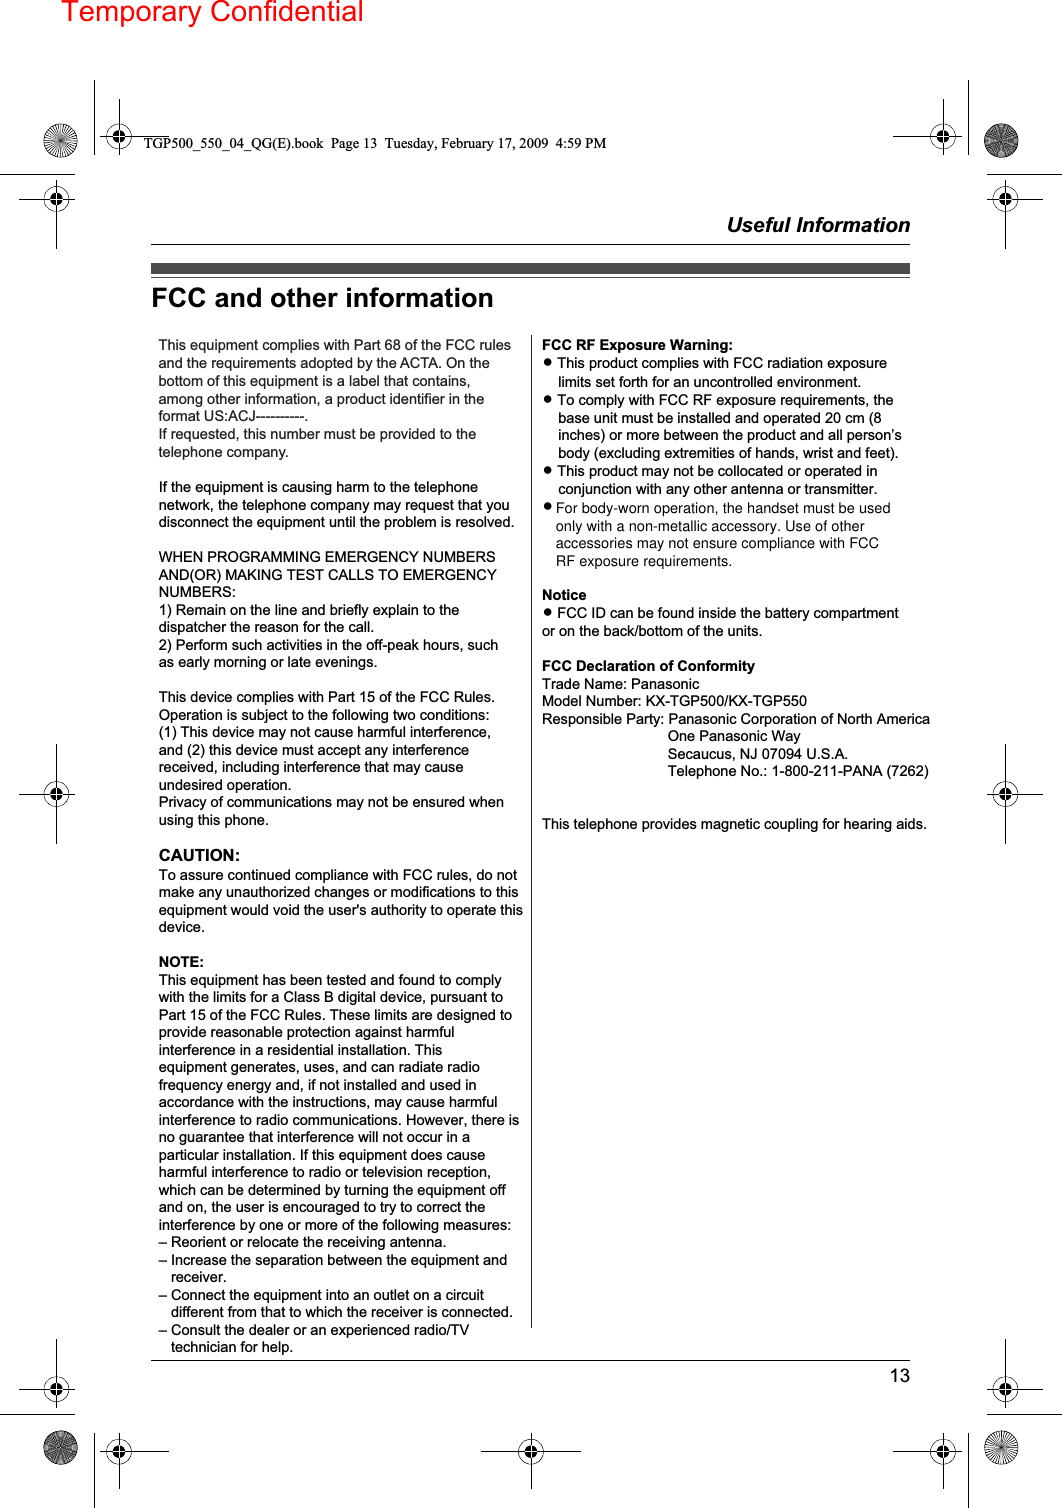 Temporary ConfidentialUseful Information13FCC and other informationThis equipment complies with Part 68 of the FCC rules and the requirements adopted by the ACTA. On the bottom of this equipment is a label that contains, among other information, a product identifier in the format US:ACJ----------.If requested, this number must be provided to the telephone company.L Registration No............. (found on the back of the unit/KX-TGP500)  (found on the bottom of the unit/KX-TGP550)L Ringer Equivalence No. (REN).......0.1BA plug and jack used to connect this equipment to the premises wiring and telephone network must comply with the applicable FCC Part 68 rules and requirements adopted by the ACTA. A compliant telephone cord and modular plug is provided with the product. It is designed to be connected to a compatible modular jack that is also compliant.The REN is used to determine the number of devices that may be connected to a telephone line. Excessive RENs on a telephone line may result in the devices not ringing in response to an incoming call. In most but not all areas, the sum of RENs should not exceed five (5.0). To be certain of the number of devices that may be connected to a line, as determined by the total RENs, contact the local telephone company. For products approved after July 23, 2001, the REN for the product is part of the product identifier that has the format US:AAAEQ##TXXXX. The digits represented by ## are the REN without a decimal point (e.g., 03 is a REN of 0.3).If this equipment causes harm to the telephone network, the telephone company will notify you in advance that temporary discontinuance of service may be required. But if advance notice isn&apos;t practical, the telephone company will notify the customer as soon as possible. Also, you will be advised of your right to file a complaint with the FCC if you believe it is necessary.The telephone company may make changes in its facilities, equipment, operations or procedures that could affect the operation of the equipment. If this happens the telephone company will provide advance notice in order for you to make necessary modifications to maintain uninterrupted service.If trouble is experienced with this equipment, for repair or warranty information, please contact a Factory Service Center or other Authorized Servicer. If the equipment is causing harm to the telephone network, the telephone company may request that you disconnect the equipment until the problem is resolved.Connection to party line service is subject to state tariffs. Contact the state public utility commission, public service commission or corporation commission for information.If your home has specially wired alarm equipment connected to the telephone line, ensure the installation of this equipment does not disable your alarm equipment. If you have questions about what will disable alarm equipment, consult your telephone company or a qualified installer.This equipment is hearing aid compatible as defined by the FCC in 47 CFR Section 68.316.When you hold the phone to your ear, noise might be heard in your Hearing Aid. Some Hearing Aids are not adequately shielded from external RF (radio frequency) energy. If noise occurs, use an optional headset accessory or the speakerphone option (if applicable) when using this phone. Consult with your audiologist or Hearing Aid manufacturer about the availability of Hearing Aids which provide adequate shielding to RF energy commonly emitted by digital devices.WHEN PROGRAMMING EMERGENCY NUMBERS AND(OR) MAKING TEST CALLS TO EMERGENCY NUMBERS:1) Remain on the line and briefly explain to the dispatcher the reason for the call.2) Perform such activities in the off-peak hours, such as early morning or late evenings.This device complies with Part 15 of the FCC Rules. Operation is subject to the following two conditions:(1) This device may not cause harmful interference, and (2) this device must accept any interference received, including interference that may cause undesired operation.Privacy of communications may not be ensured when using this phone.CAUTION:Any changes or modifications not expressly approved by the party responsible for compliance could void the user’s authority to operate this device.NOTE:This equipment has been tested and found to comply with the limits for a Class B digital device, pursuant to Part 15 of the FCC Rules. These limits are designed to provide reasonable protection against harmful interference in a residential installation. Thisequipment generates, uses, and can radiate radio  TGP500_550_04_QG(E).book  Page 13  Tuesday, February 17, 2009  4:59 PMIf the equipment is causing harm to the telephone network, the telephone company may request that you disconnect the equipment until the problem is resolved. WHEN PROGRAMMING EMERGENCY NUMBERS AND(OR) MAKING TEST CALLS TO EMERGENCY NUMBERS: 1) Remain on the line and briefly explain to the dispatcher the reason for the call. 2) Perform such activities in the off-peak hours, such as early morning or late evenings. This device complies with Part 15 of the FCC Rules. Operation is subject to the following two conditions: (1) This device may not cause harmful interference, and (2) this device must accept any interference received, including interference that may cause undesired operation. Privacy of communications may not be ensured when using this phone. CAUTION: To assure continued compliance with FCC rules, do not make any unauthorized changes or modifications to this equipment would void the user&apos;s authority to operate this device. NOTE: This equipment has been tested and found to comply with the limits for a Class B digital device, pursuant to Part 15 of the FCC Rules. These limits are designed to provide reasonable protection against harmful interference in a residential installation. This equipment generates, uses, and can radiate radio frequency energy and, if not installed and used in accordance with the instructions, may cause harmful interference to radio communications. However, there is no guarantee that interference will not occur in a particular installation. If this equipment does cause harmful interference to radio or television reception, which can be determined by turning the equipment off and on, the user is encouraged to try to correct the interference by one or more of the following measures: – Reorient or relocate the receiving antenna. – Increase the separation between the equipment and   receiver. – Connect the equipment into an outlet on a circuit   different from that to which the receiver is connected. – Consult the dealer or an experienced radio/TV   technician for help.FCC RF Exposure Warning: L This product complies with FCC radiation exposure     limits set forth for an uncontrolled environment. L To comply with FCC RF exposure requirements, the     base unit must be installed and operated 20 cm (8     inches) or more between the product and all person’s     body (excluding extremities of hands, wrist and feet). L This product may not be collocated or operated in     conjunction with any other antenna or transmitter. L The handset may be carried and operated with only     the specific provided belt-clip. Other non-tested belt-     clips or similar body-worn accessories may not     comply and must be avoided.  Notice L FCC ID can be found inside the battery compartment or on the back/bottom of the units.  FCC Declaration of Conformity Trade Name: Panasonic Model Number: KX-TGP500/KX-TGP550 Responsible Party: Panasonic Corporation of North America                                One Panasonic Way                                Secaucus, NJ 07094 U.S.A.                                Telephone No.: 1-800-211-PANA (7262)   This telephone provides magnetic coupling for hearing aids.For body-worn operation, the handset must be usedonly with a non-metallic accessory. Use of otheraccessories may not ensure compliance with FCCRF exposure requirements.For body-worn operation, the handset must be used only with a non-metallic accessory. Use of other accessories may not ensure compliance with FCC RF exposure requirements.